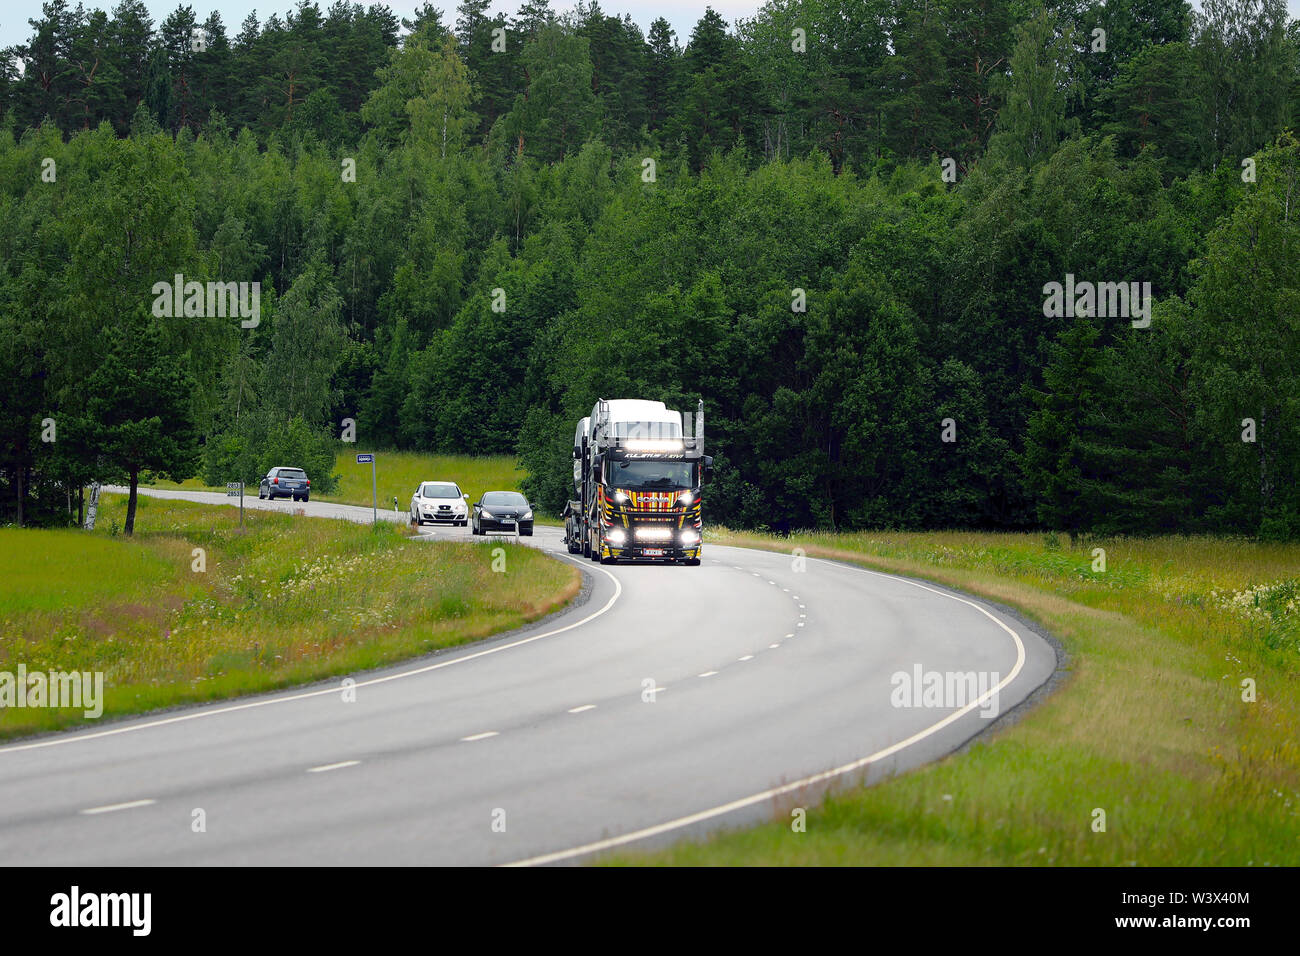 Salo, Finland - June 29, 2019: Bright headlights of unique vehicle carrier Scania R650 of Kuljetus J. Kivi light up the rural highway on day of summer Stock Photo